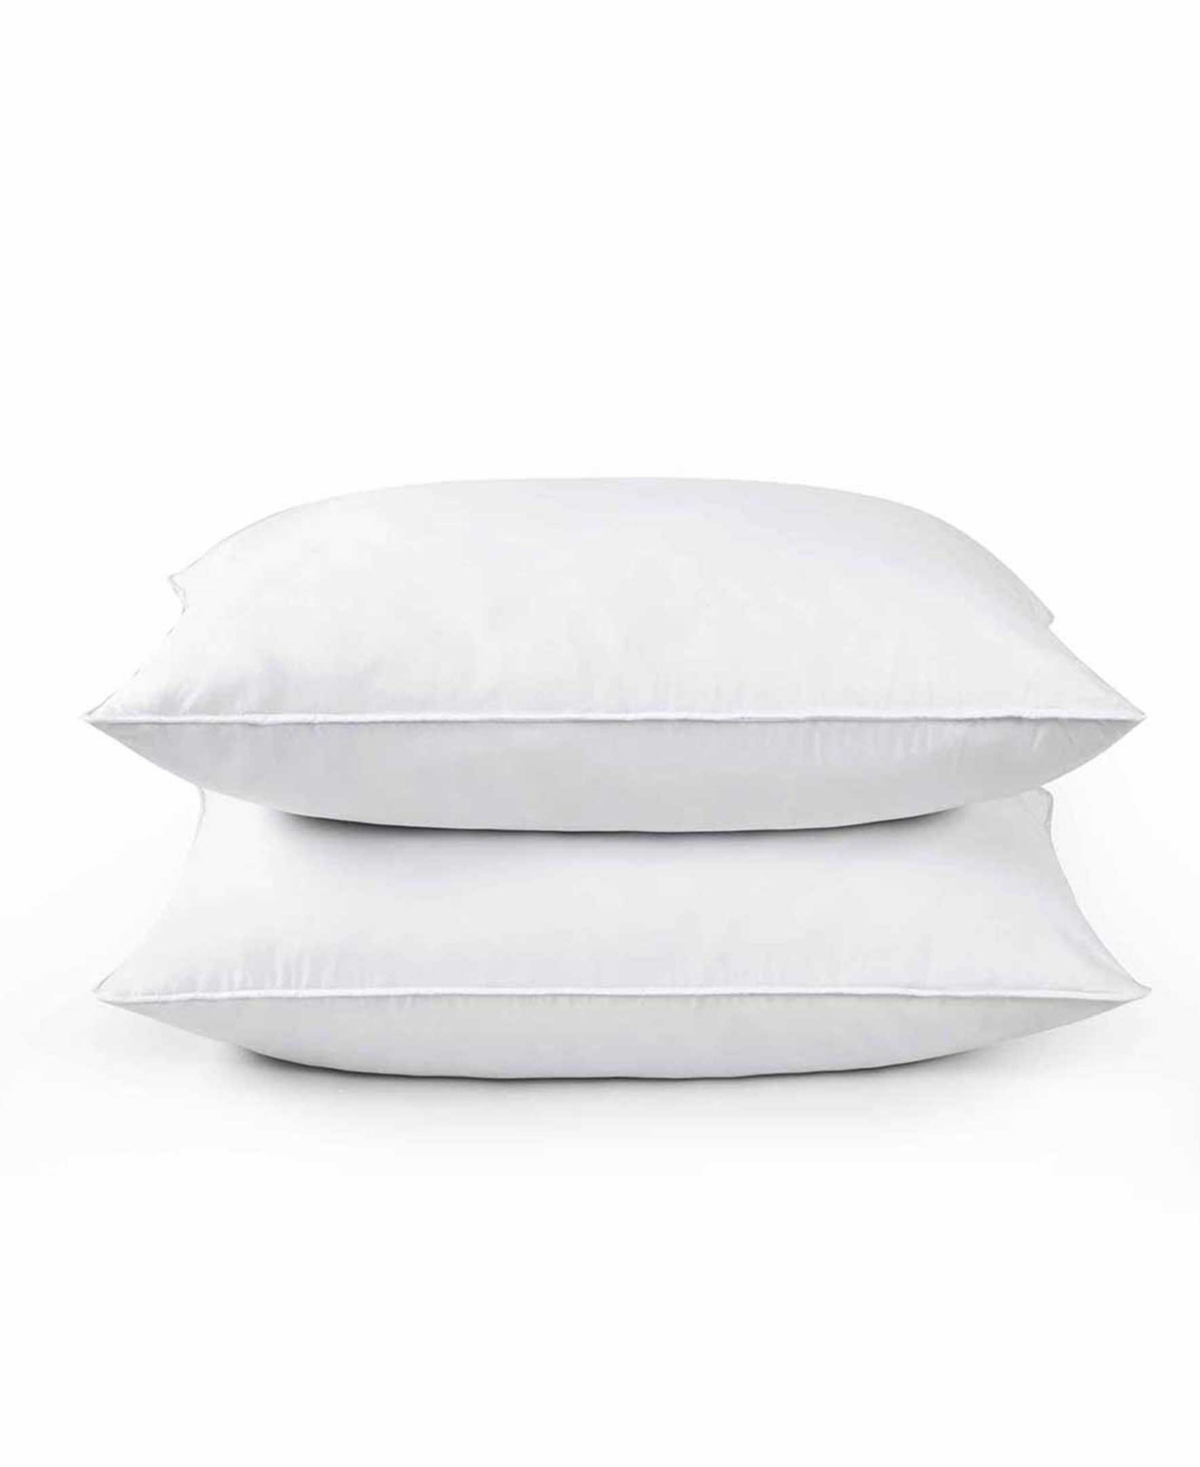 Unikome Medium Firm Goose Feather And Down Pillows, 2-pack, King In White